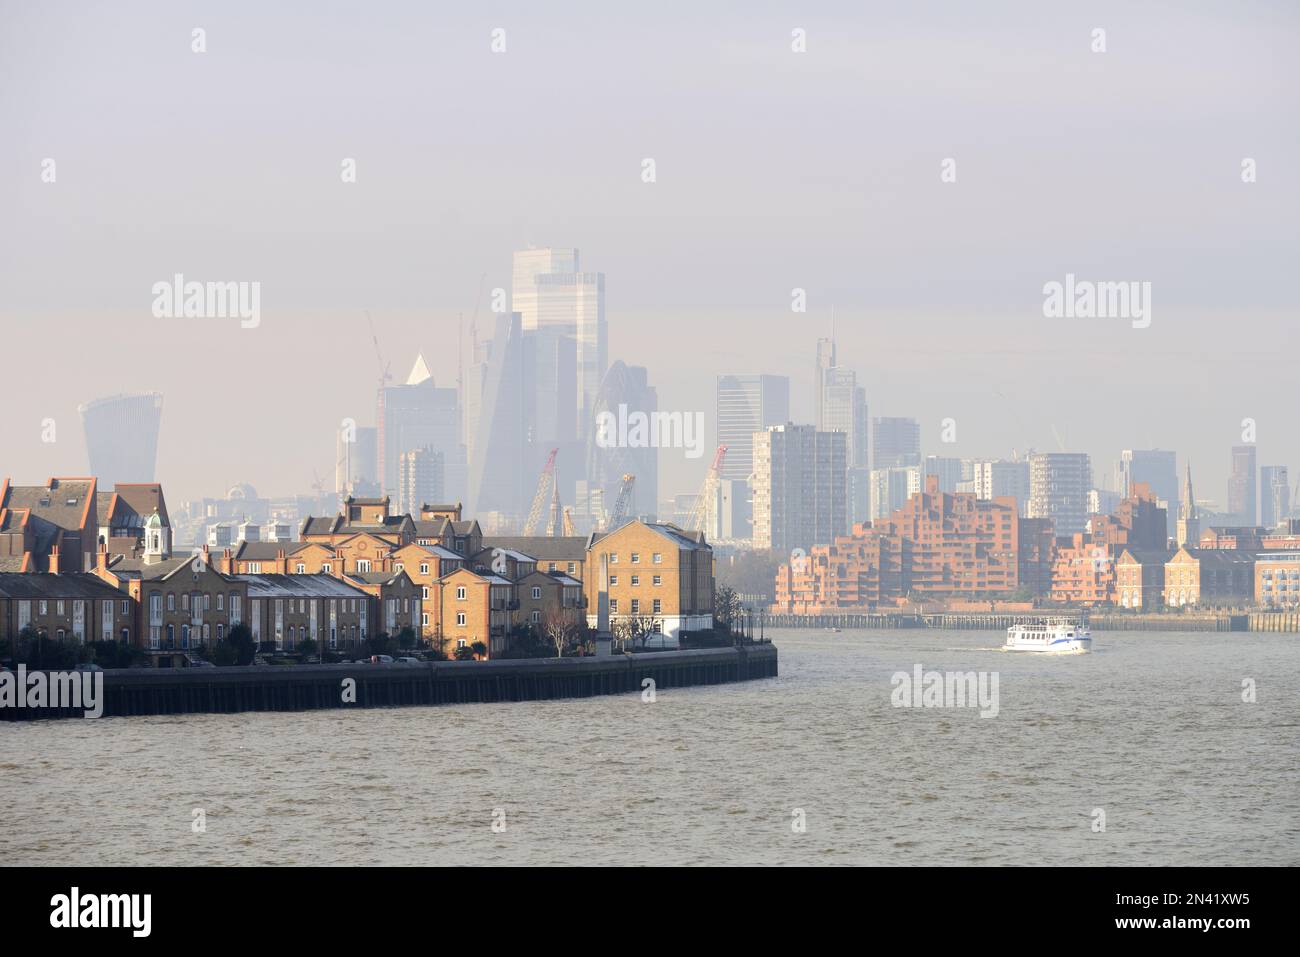 Misty City Square Mile financial district and the Thames from East London, United Kingdom Stock Photo